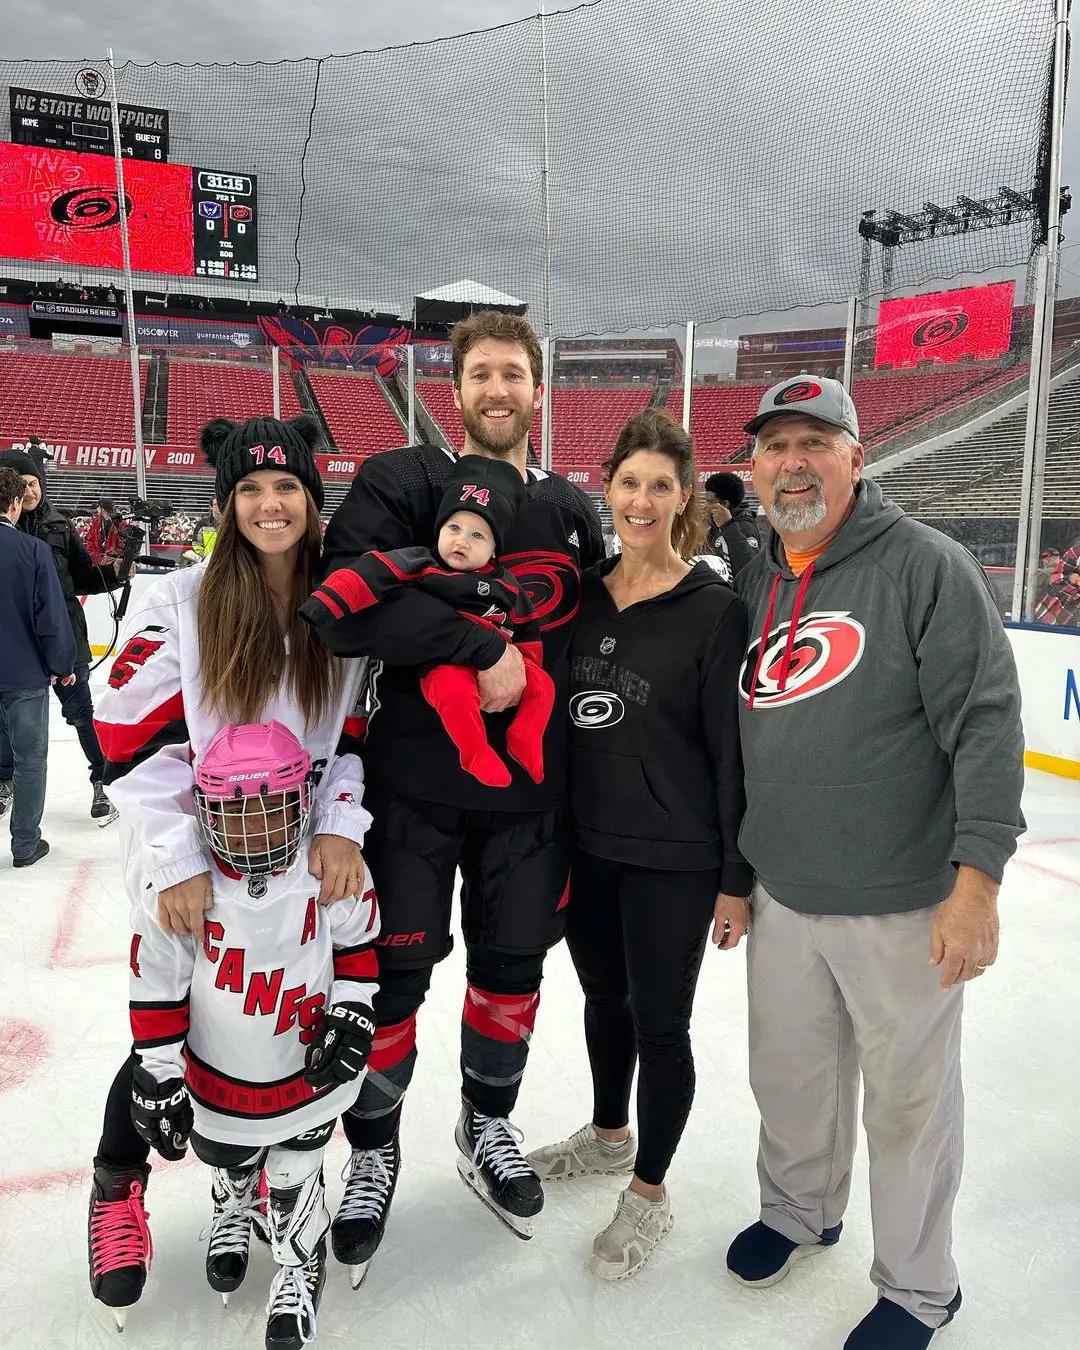 The Slavins clicked after a family skating session at Carter-Finley Stadium